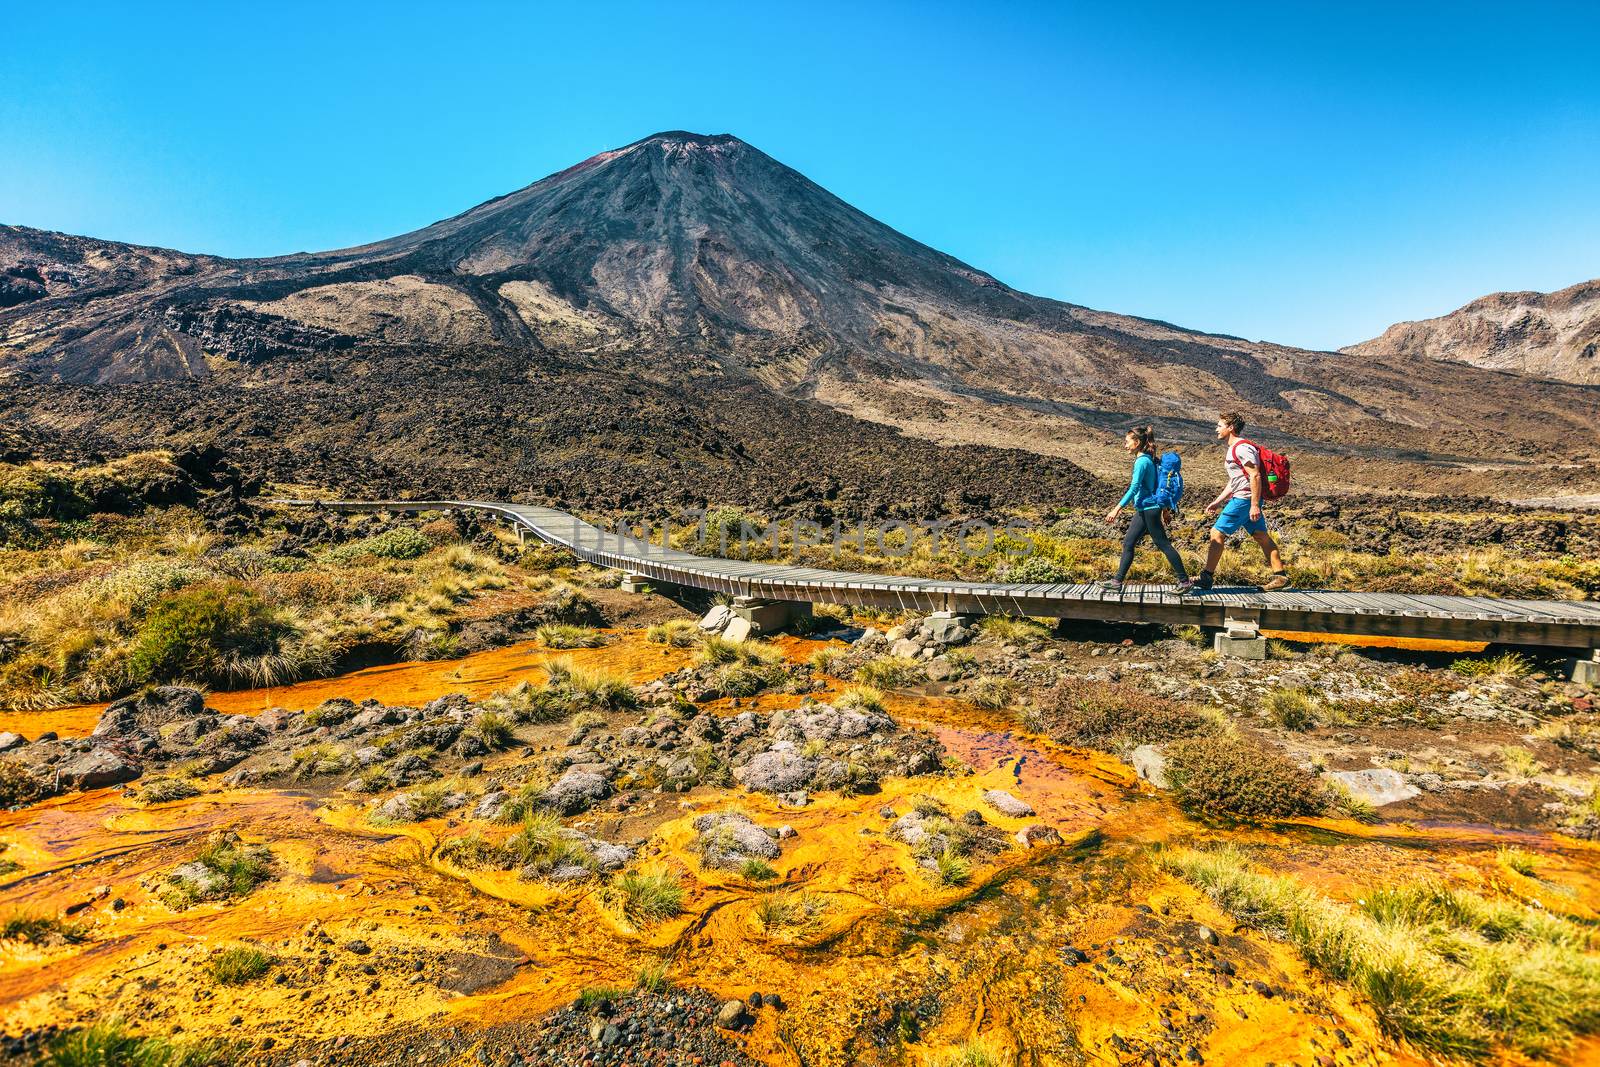 New Zealand Hiking Couple Backpackers Tramping At Tongariro National Park. Male and female hikers hiking by Mount Ngauruhoe. People living healthy active lifestyle outdoors by Maridav